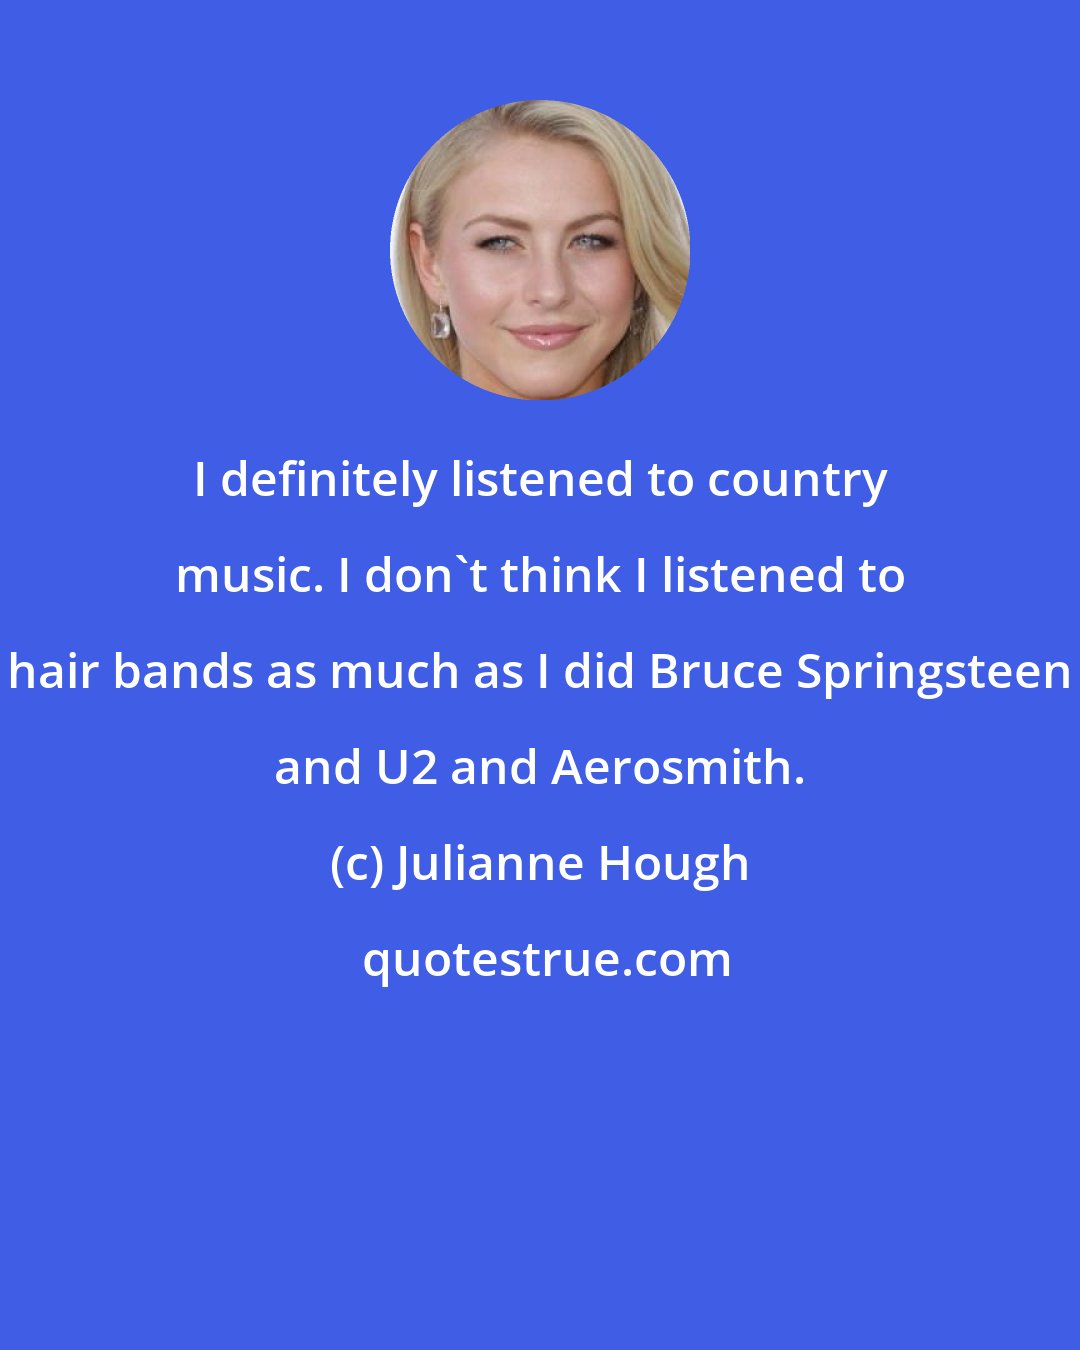 Julianne Hough: I definitely listened to country music. I don't think I listened to hair bands as much as I did Bruce Springsteen and U2 and Aerosmith.